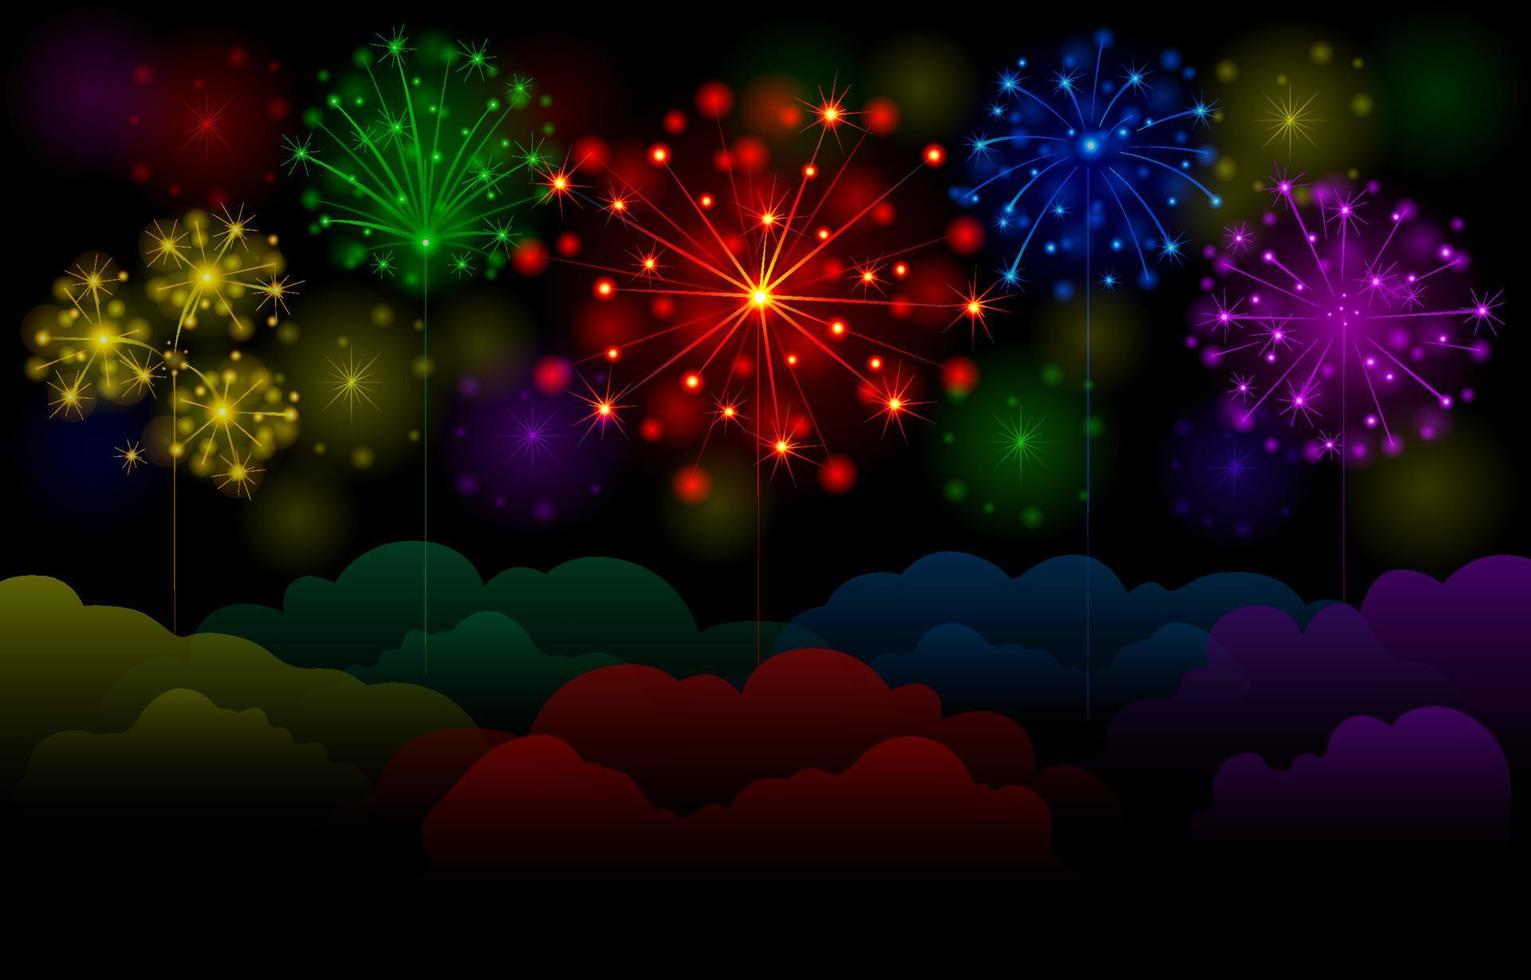 Colorful Fireworks on a Cloudy Night Sky vector